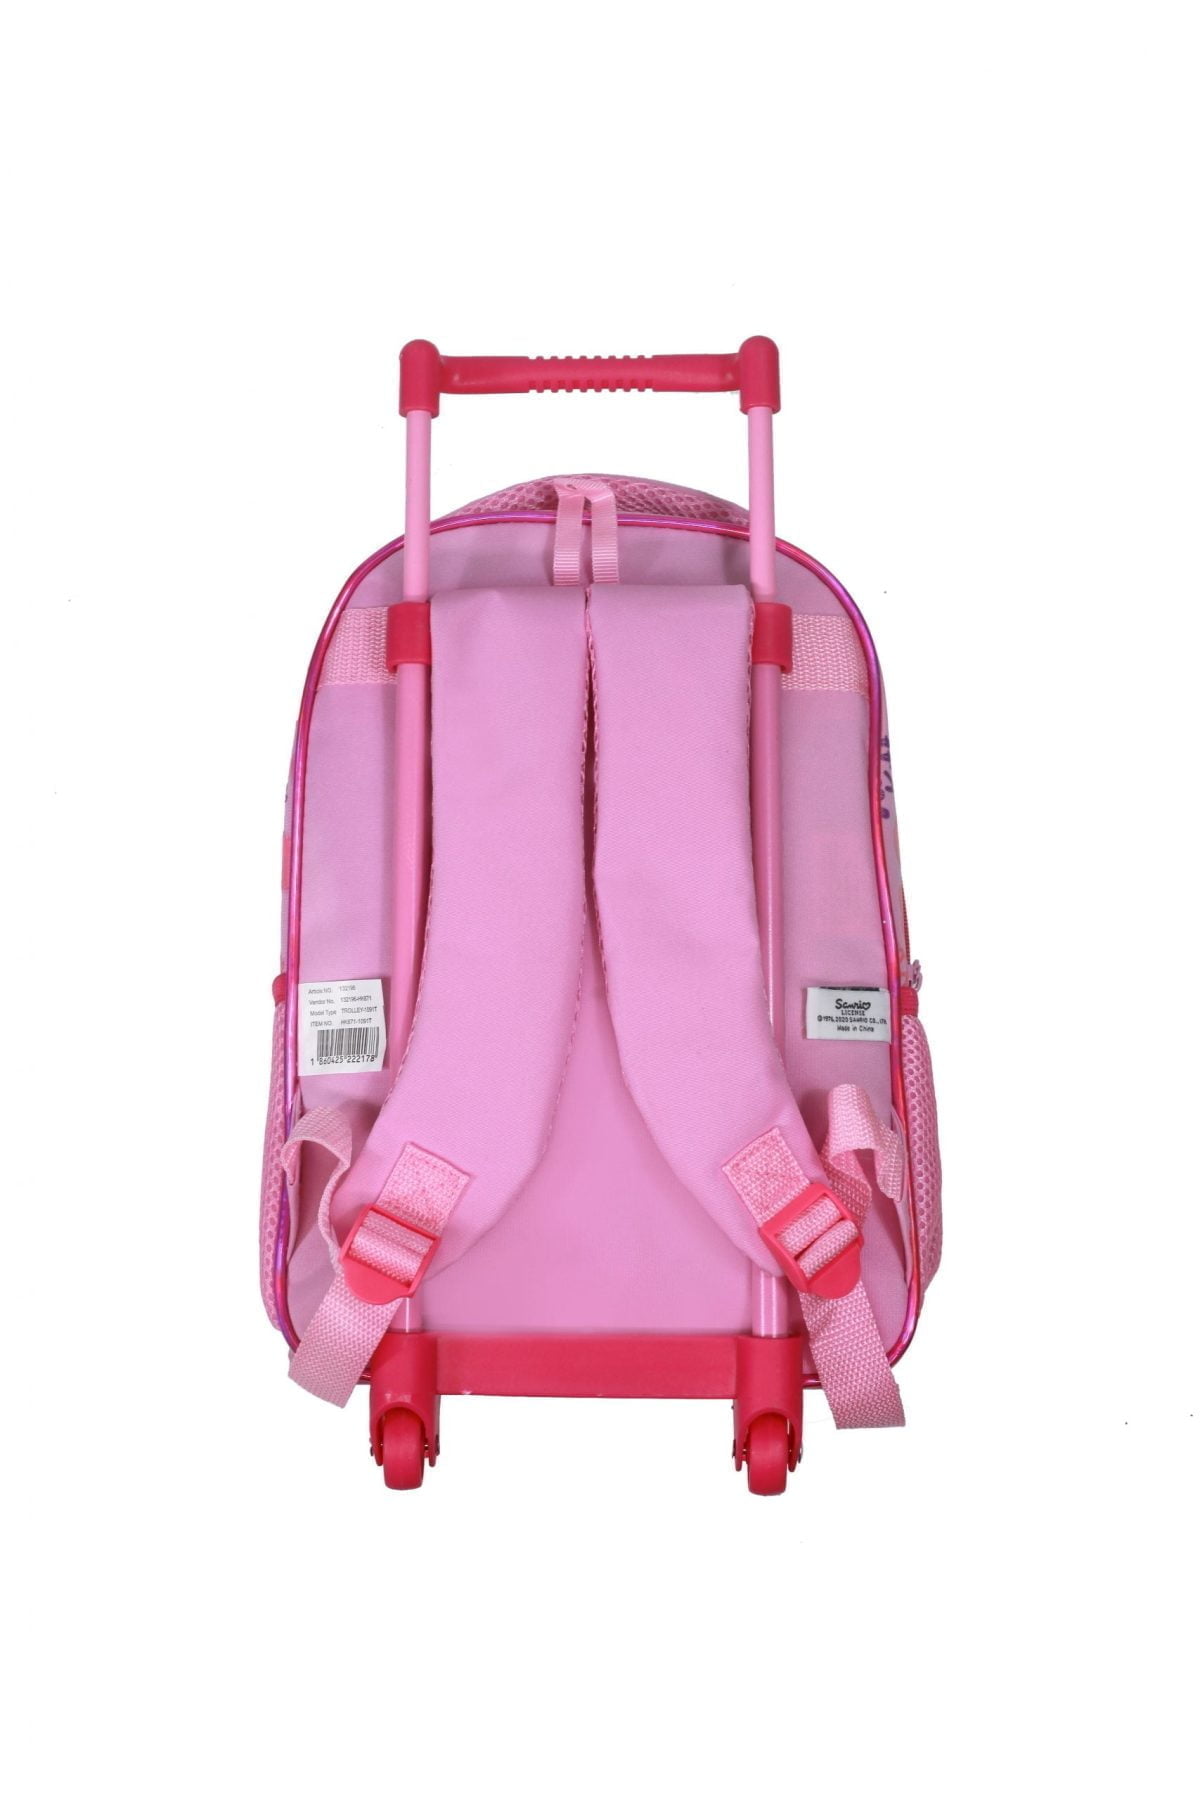 Hk671 1091T 3 Scaled The Trolley Bag Is A Reliable Companion For Your Journey. The Trolley Features Main Zip Compartment To Keep Your Child'S Belonging Or School Items. The Trolley Has Comfortable Handle On The Top. The Fine Quality Material And Printing Makes It Durable And Stylish Option. It Is Easy To Zip And Unzip With Smooth Zippers And Pullers. The Wheels On The Bottom Make It Easy To Drag. Wipe With A Clean And Dry Cloth. Hello Kitty Hello Kitty Trolley Bag 13&Quot; - 2 Main Compartments And 2 Side Pockets (Hk671)